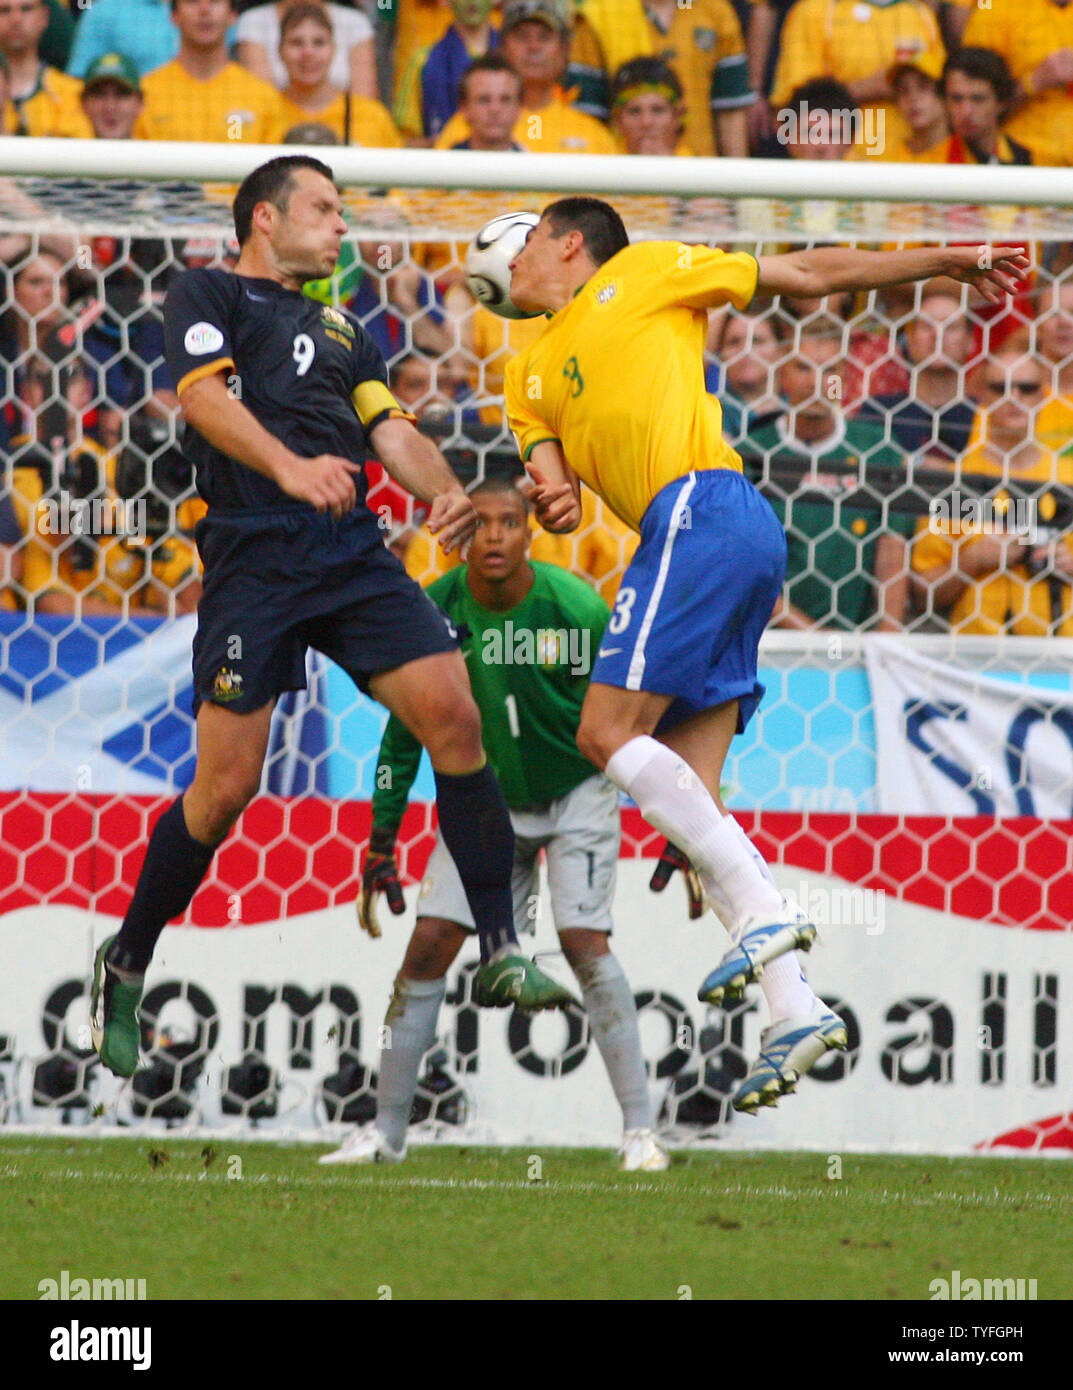 Lucio (3) from Brazil tries to make a headed goal and Australia's Mark Viduka (9) tries to prevent this in World Cup soccer action in Munich, Germany on June 18, 2006. Brazil defeated Australia 2-0.  (UPI Photo/Arthur Thill) Stock Photo